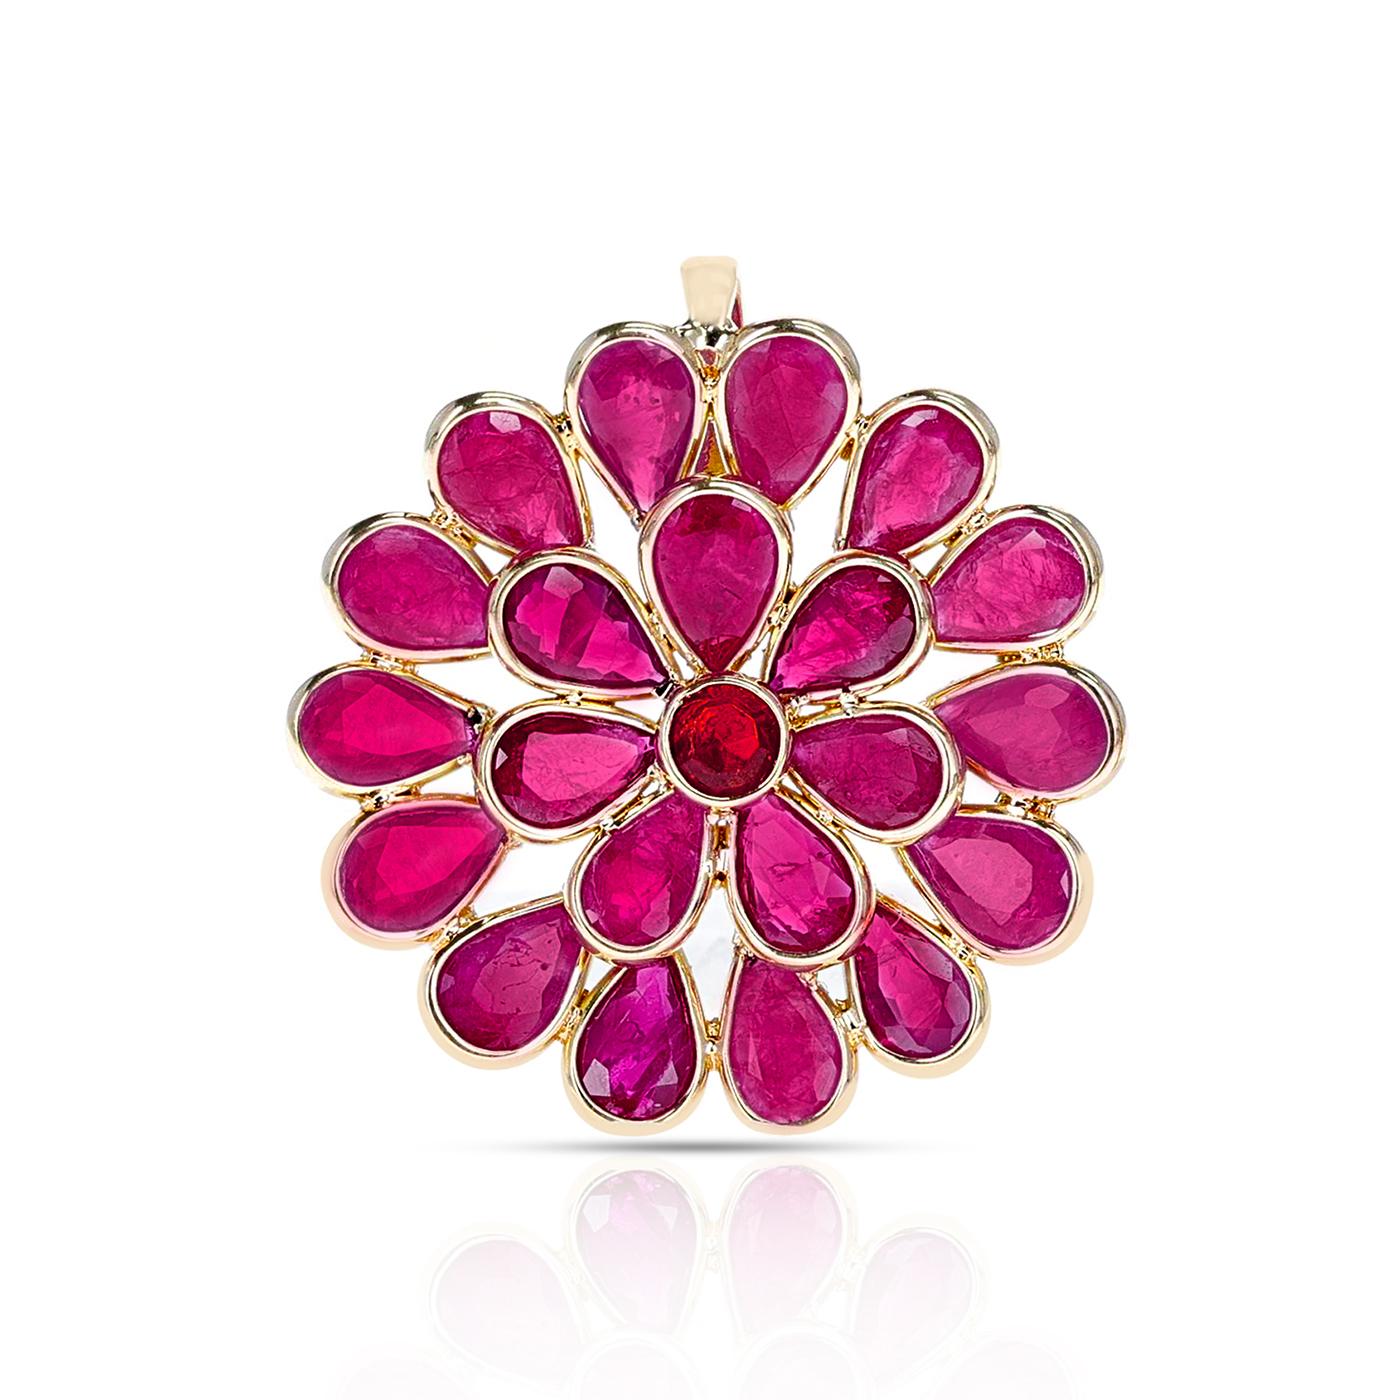 A Floral 4.30 ct. Ruby Pendant, 18k Yellow Gold. Length: 0.75 inches. Total Weight: 2.24 grams. 